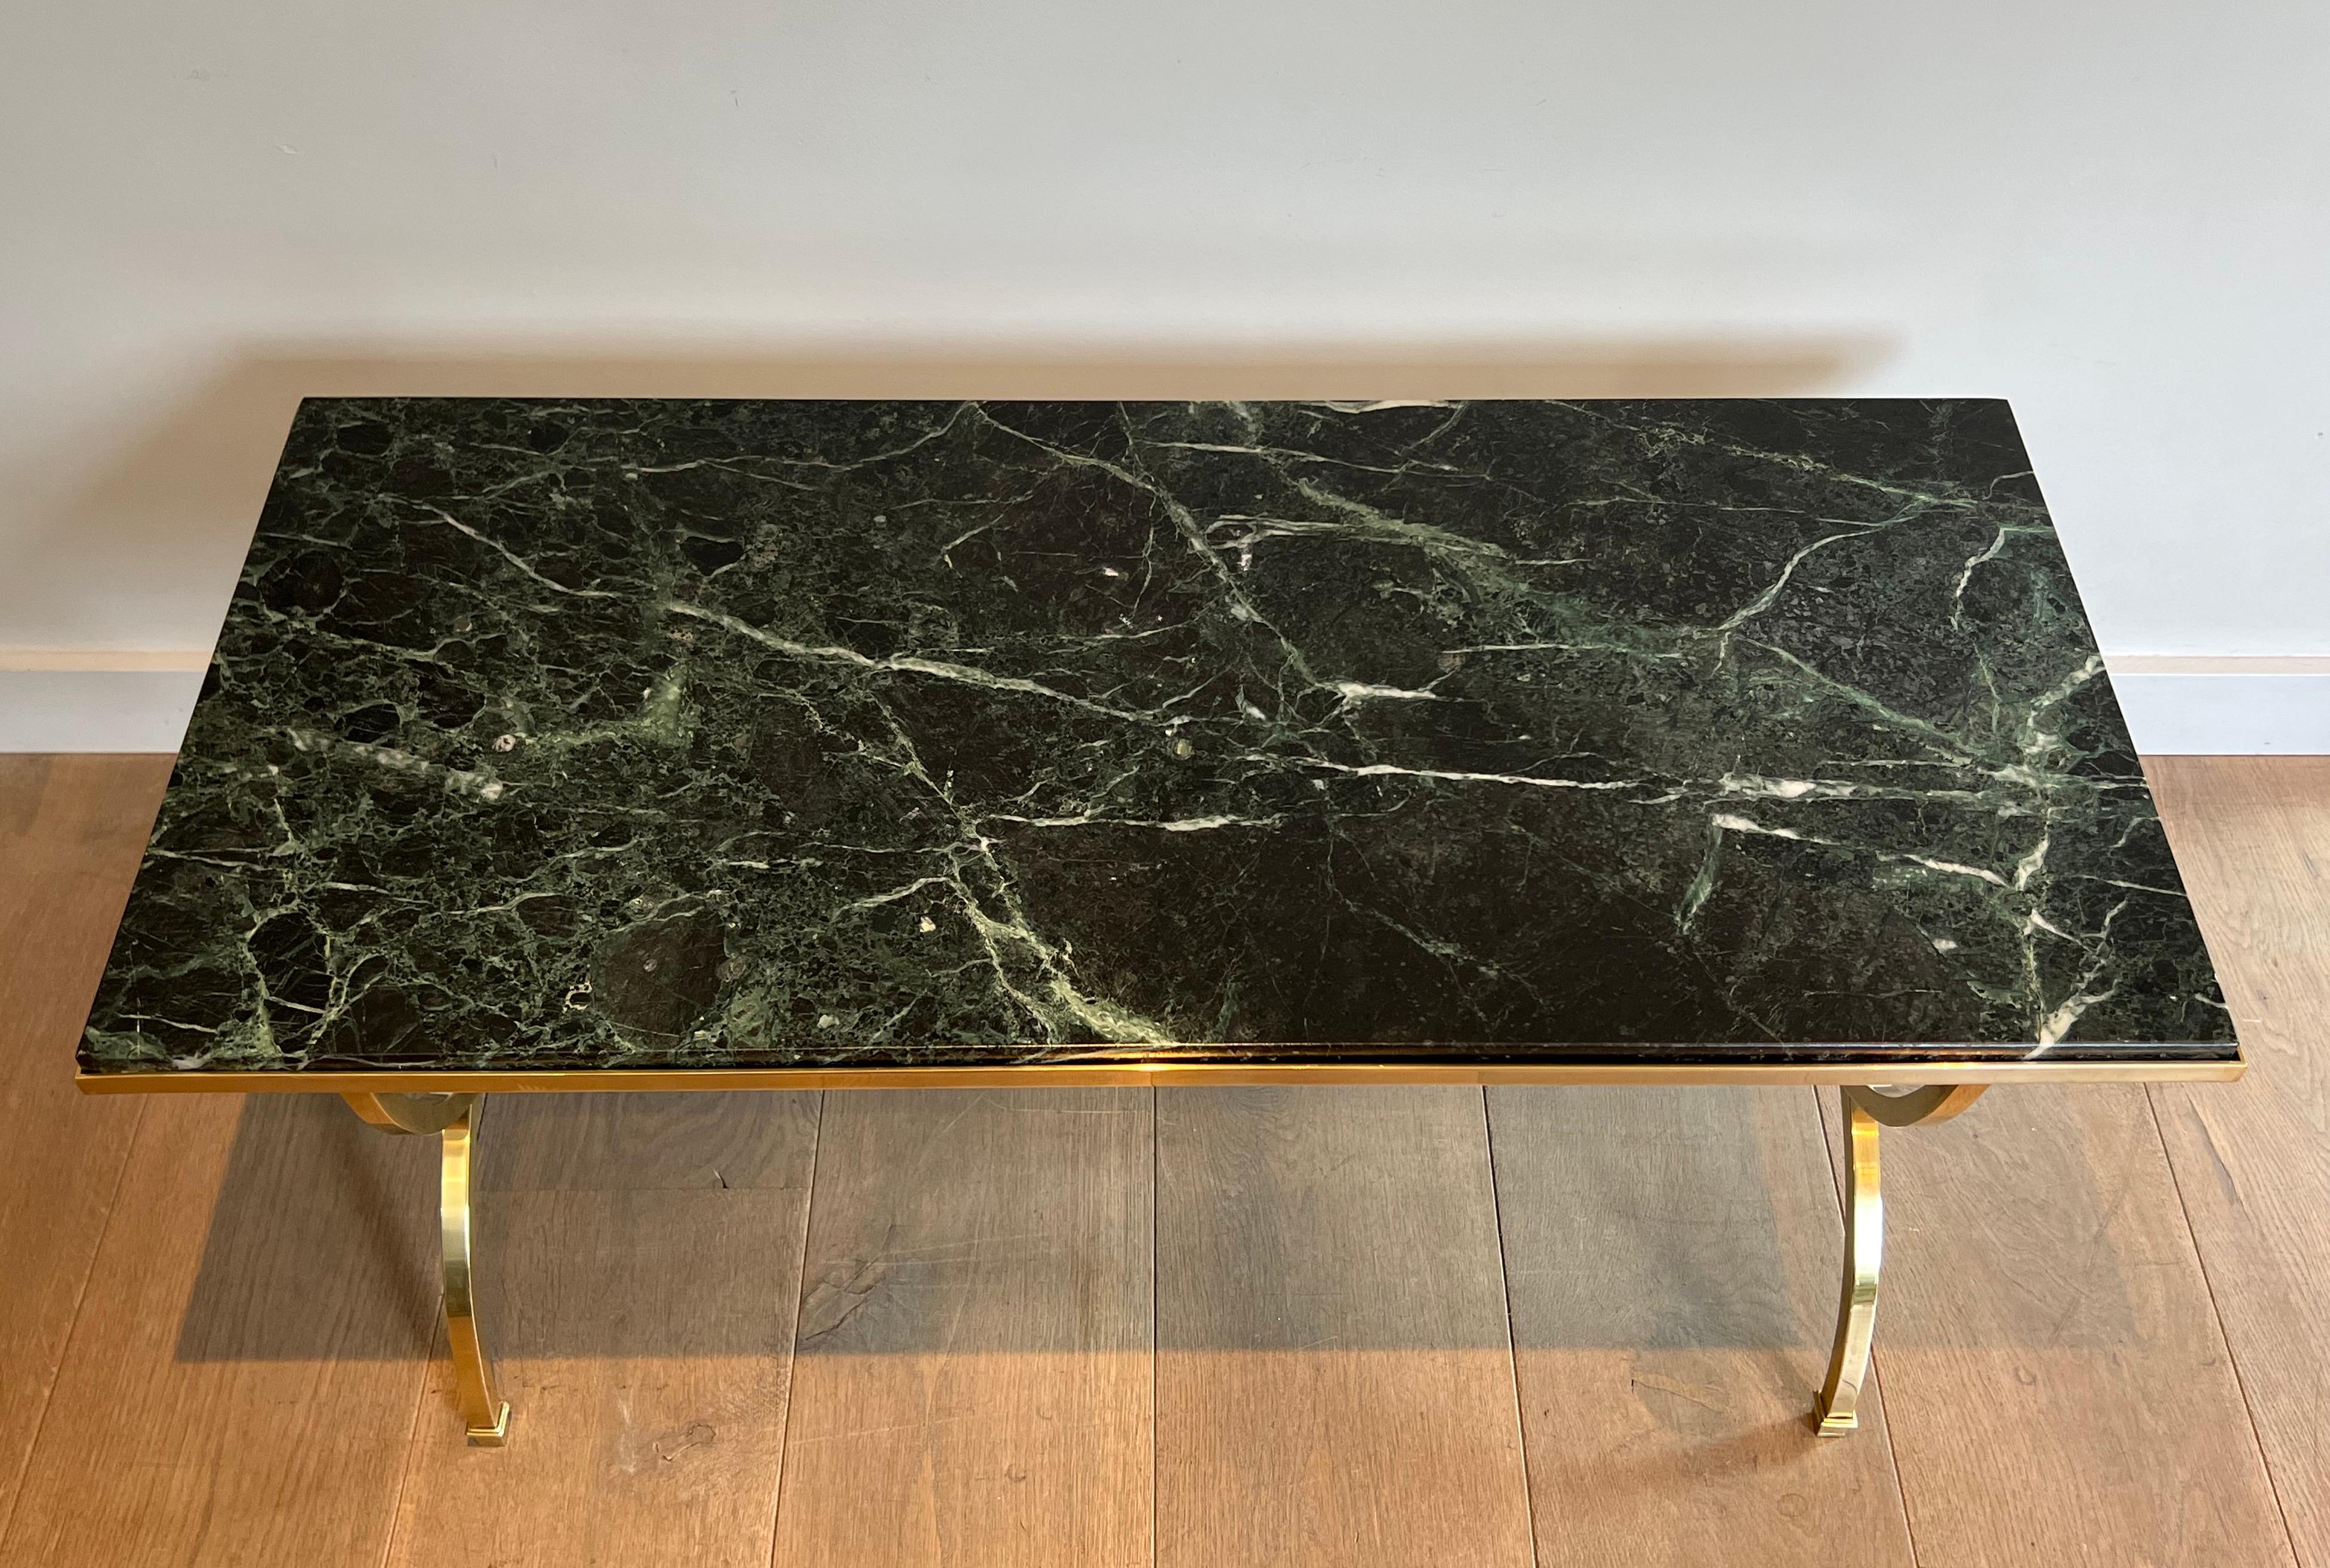 This very nice neoclassical style coffee table is made of a hoop brass base with a Green Marble Top. This is a French work by famous designer Maison Jansen. Circa 1940